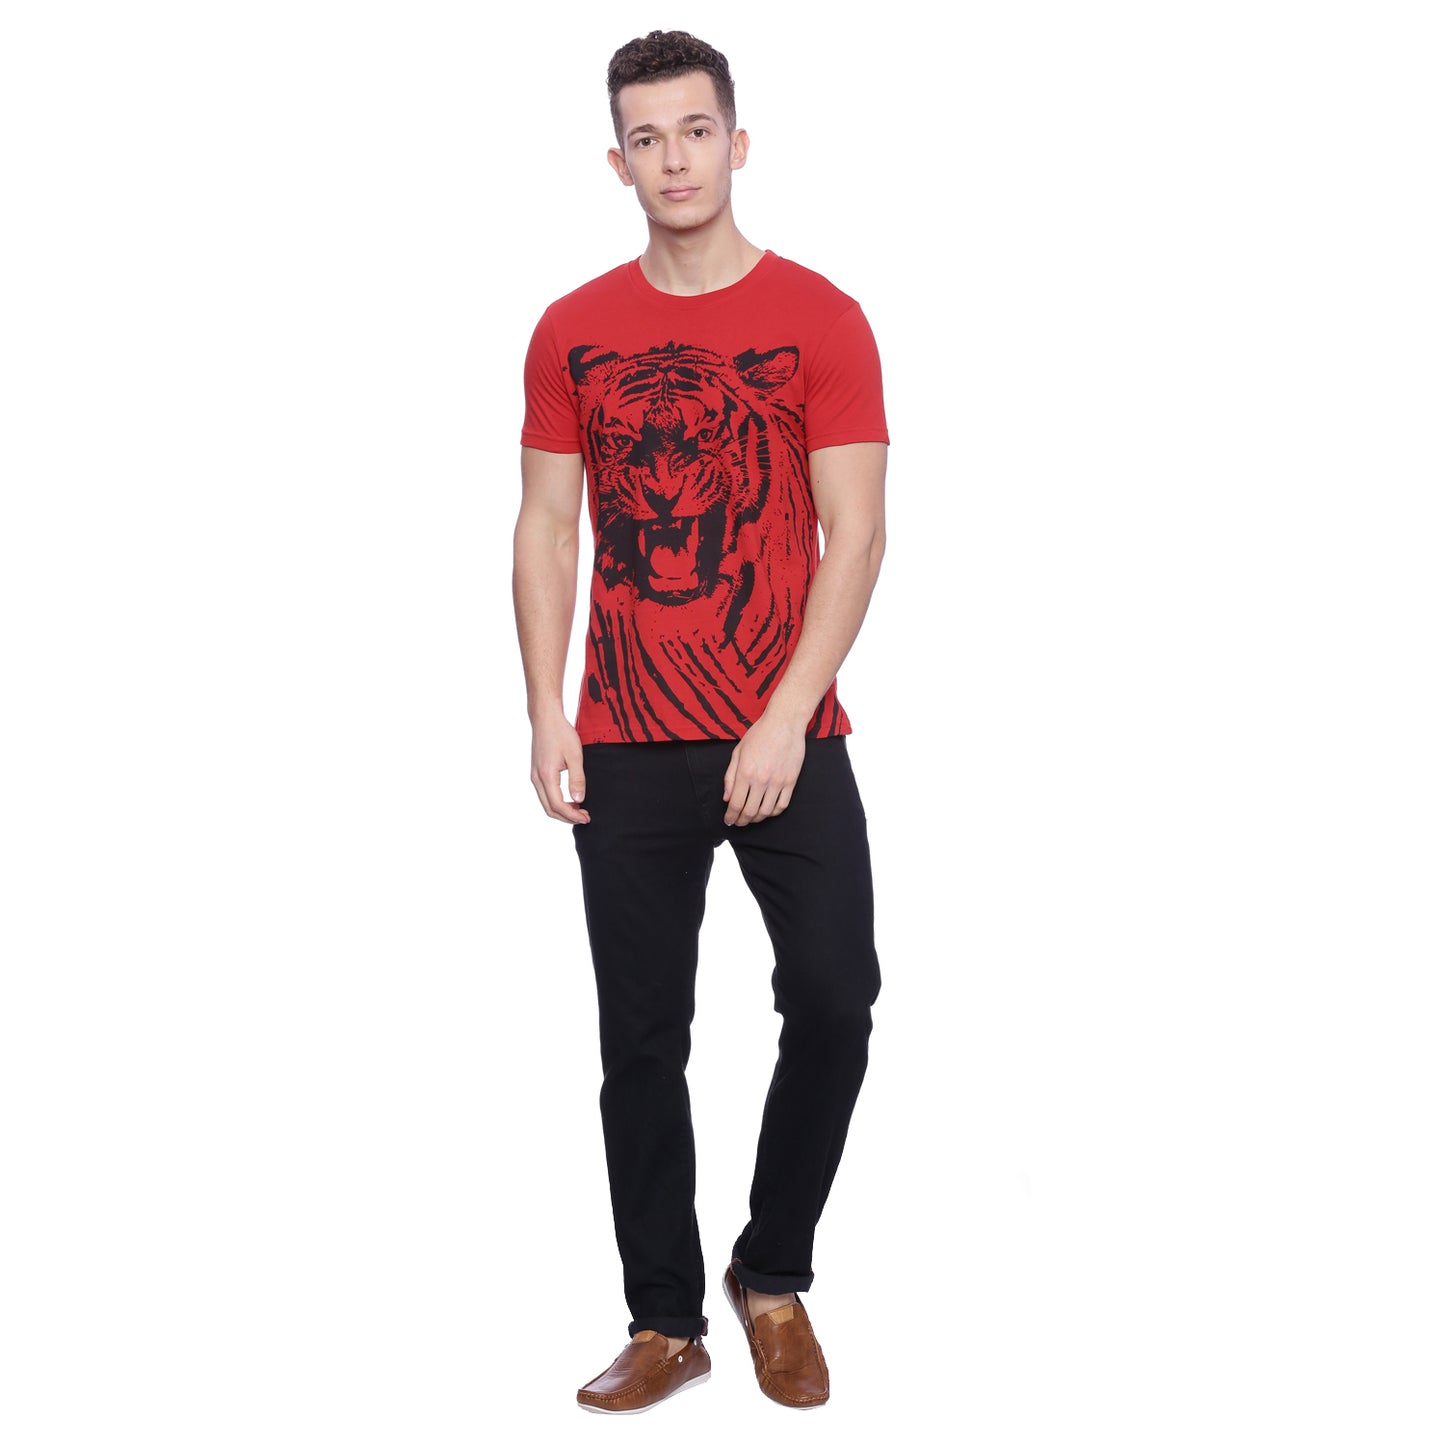 Tiger Graphic Red Printed Men T-Shirt Wolfpack